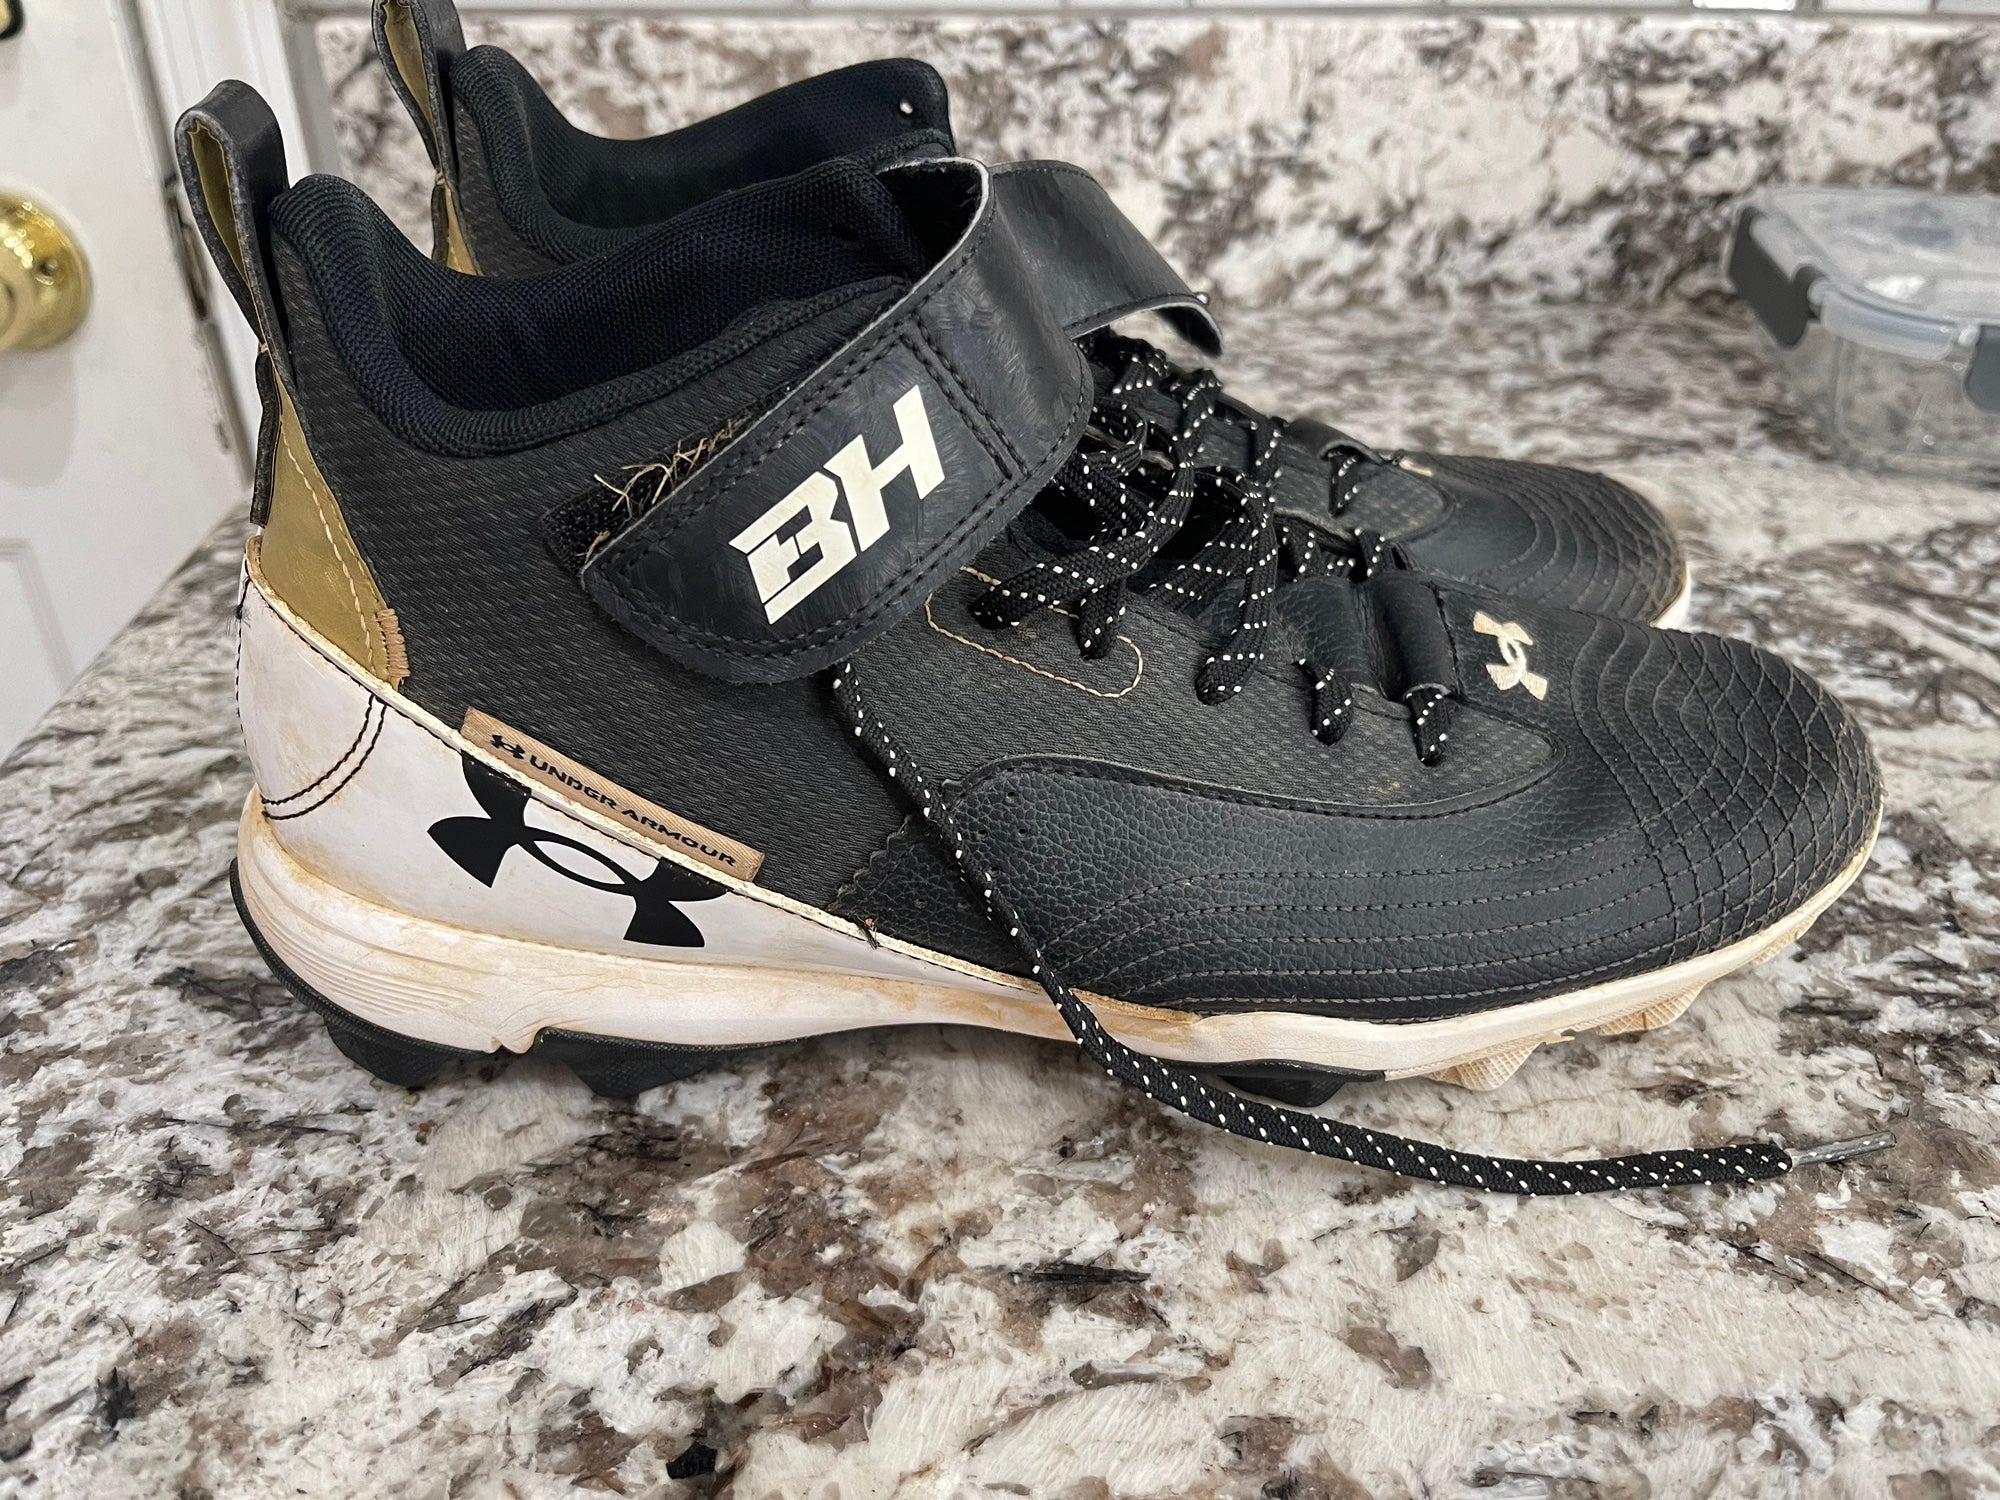 Under Armour Bryce Harper Baseball Cleats